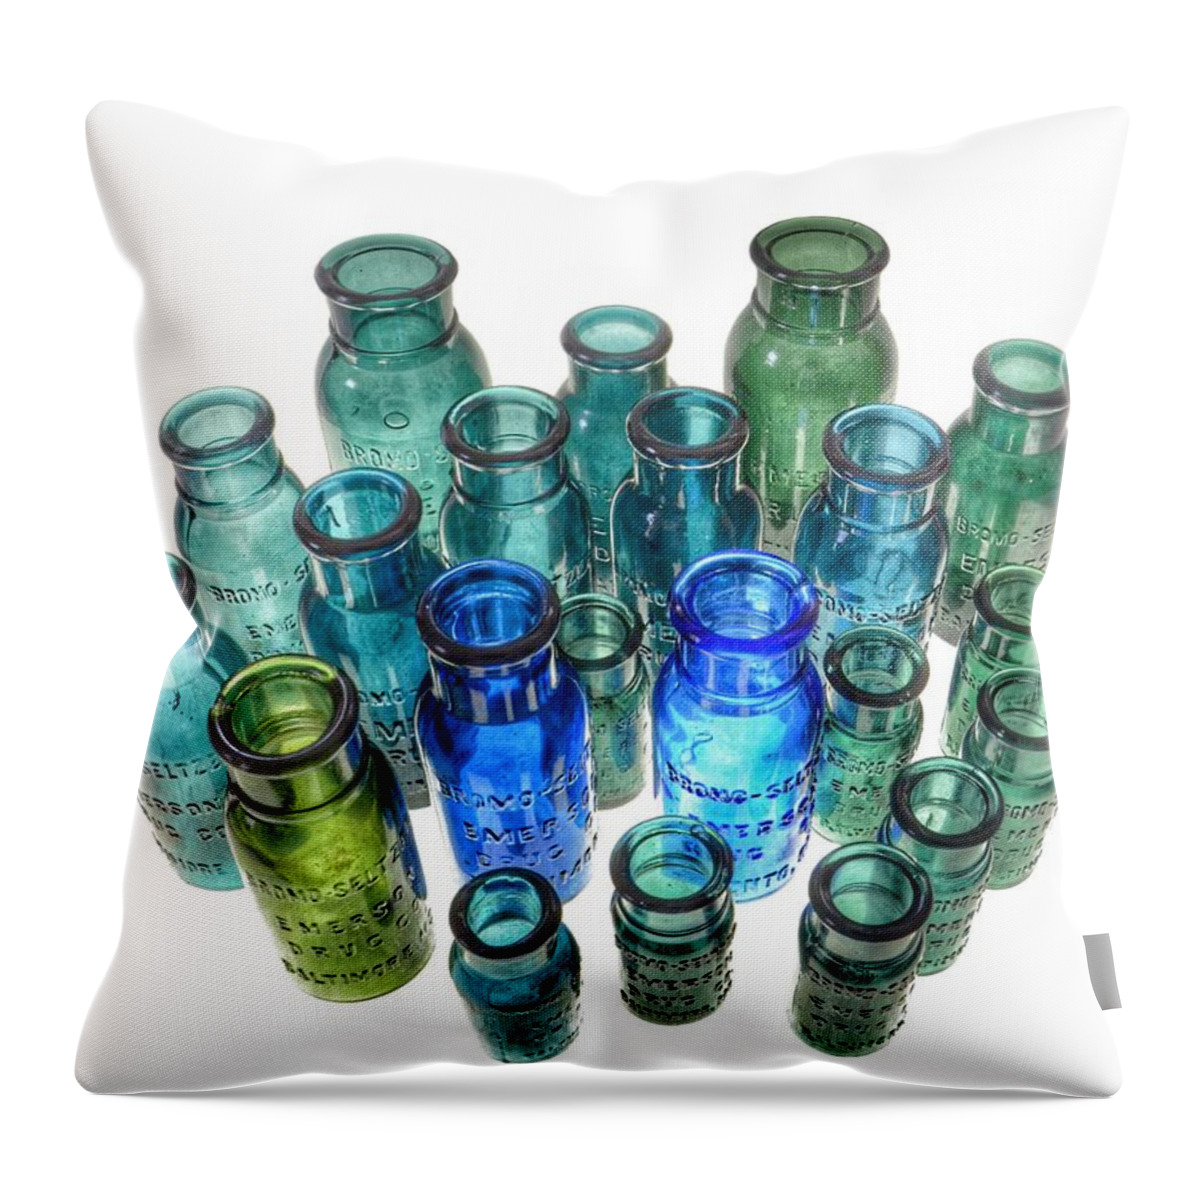 Bromo Seltzer Vintage Glass Bottles Throw Pillow featuring the photograph Bromo Seltzer Vintage Glass Bottles Collection - Rare Green by Marianna Mills